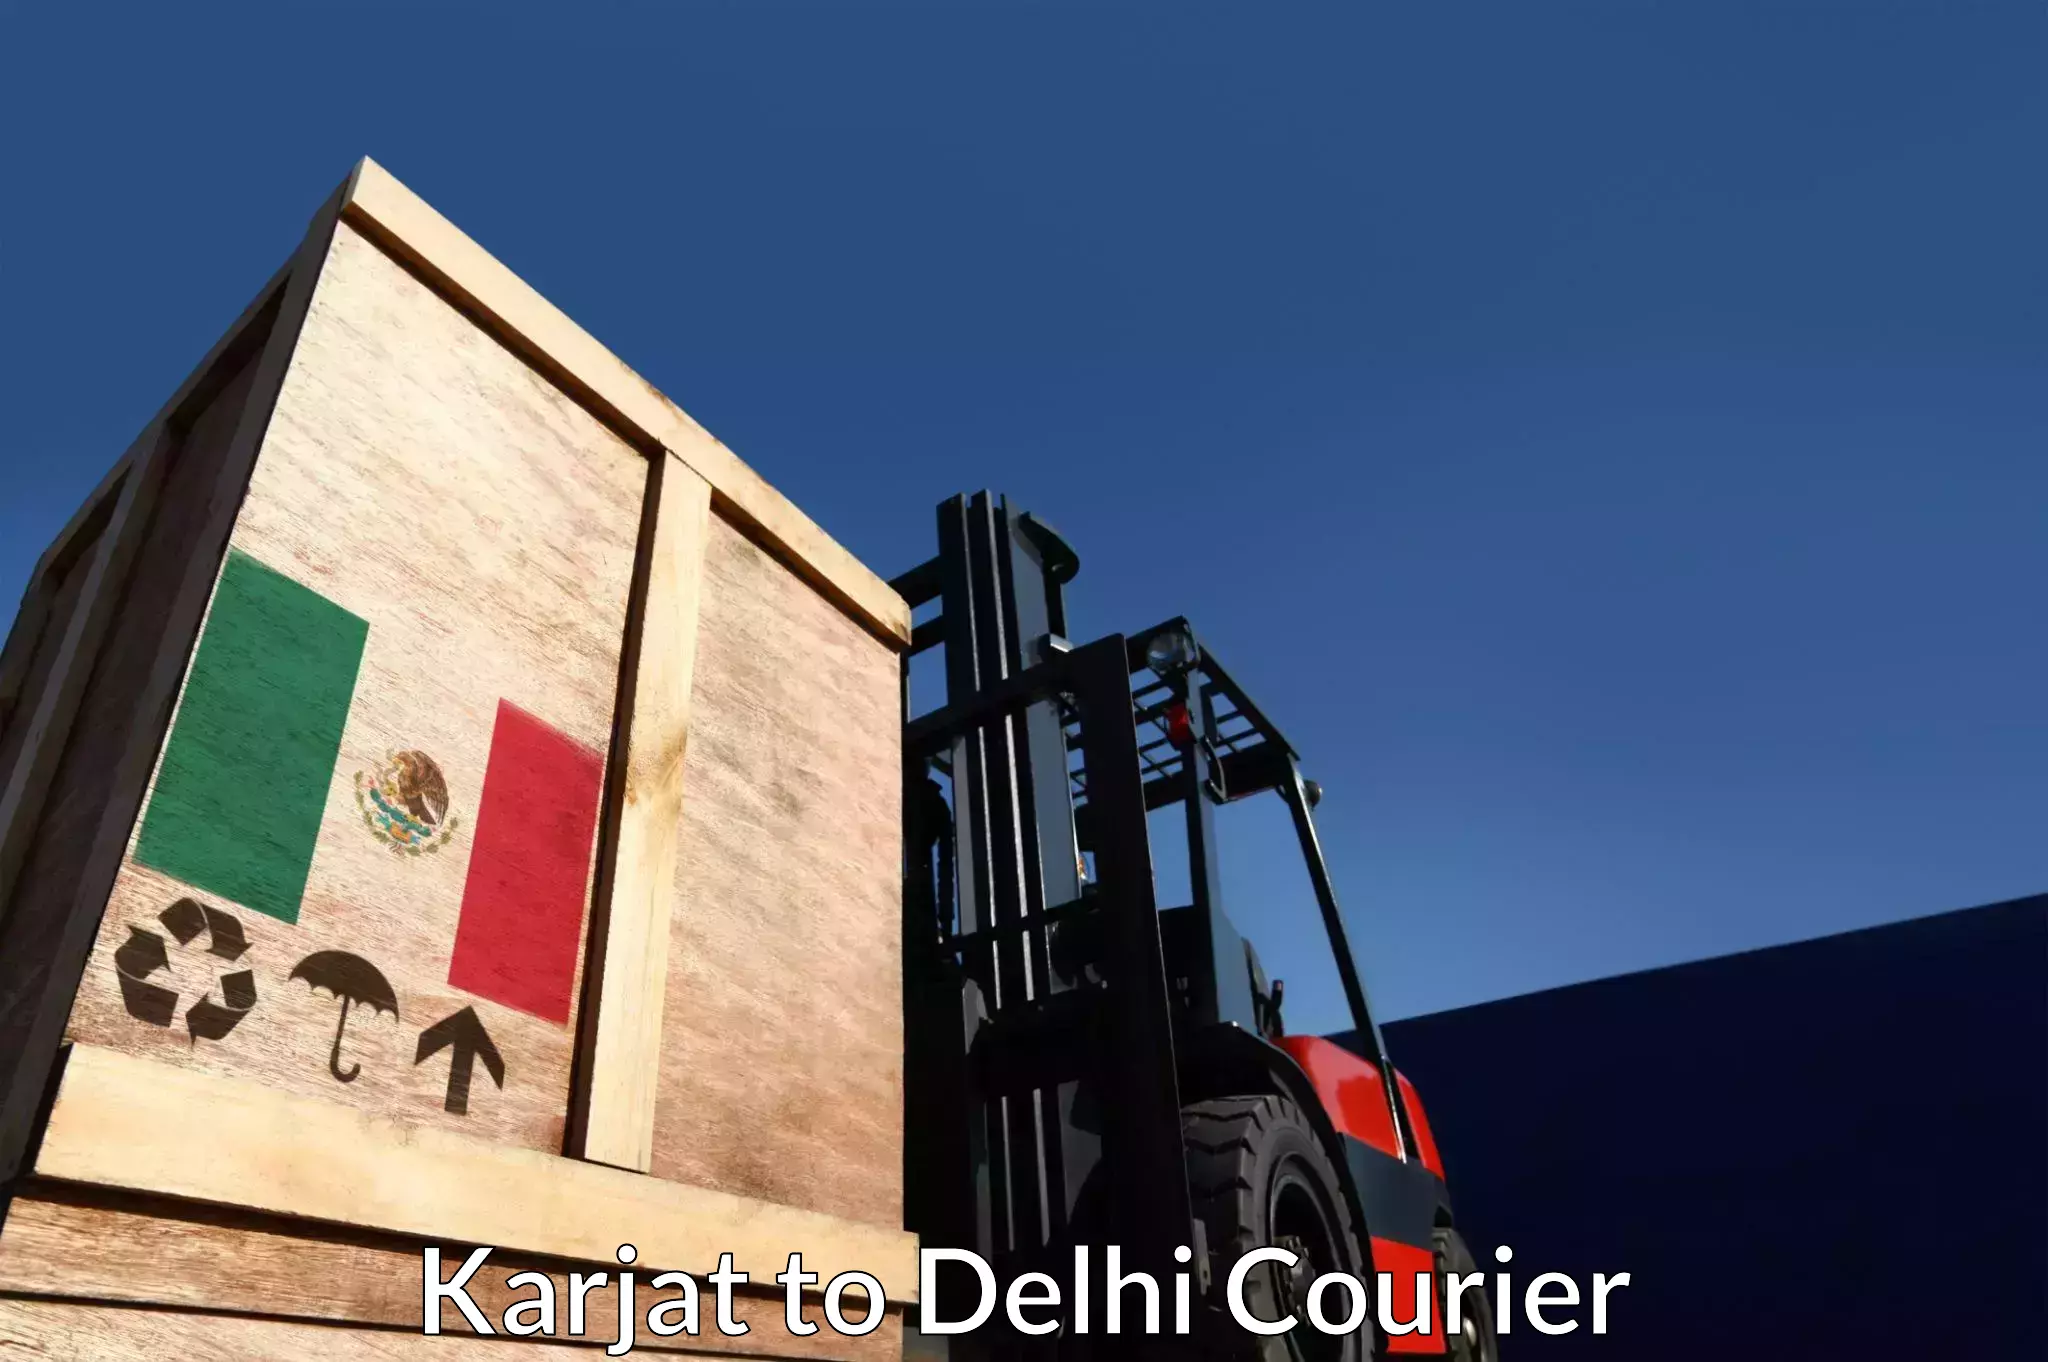 Full-service courier options Karjat to Indraprastha